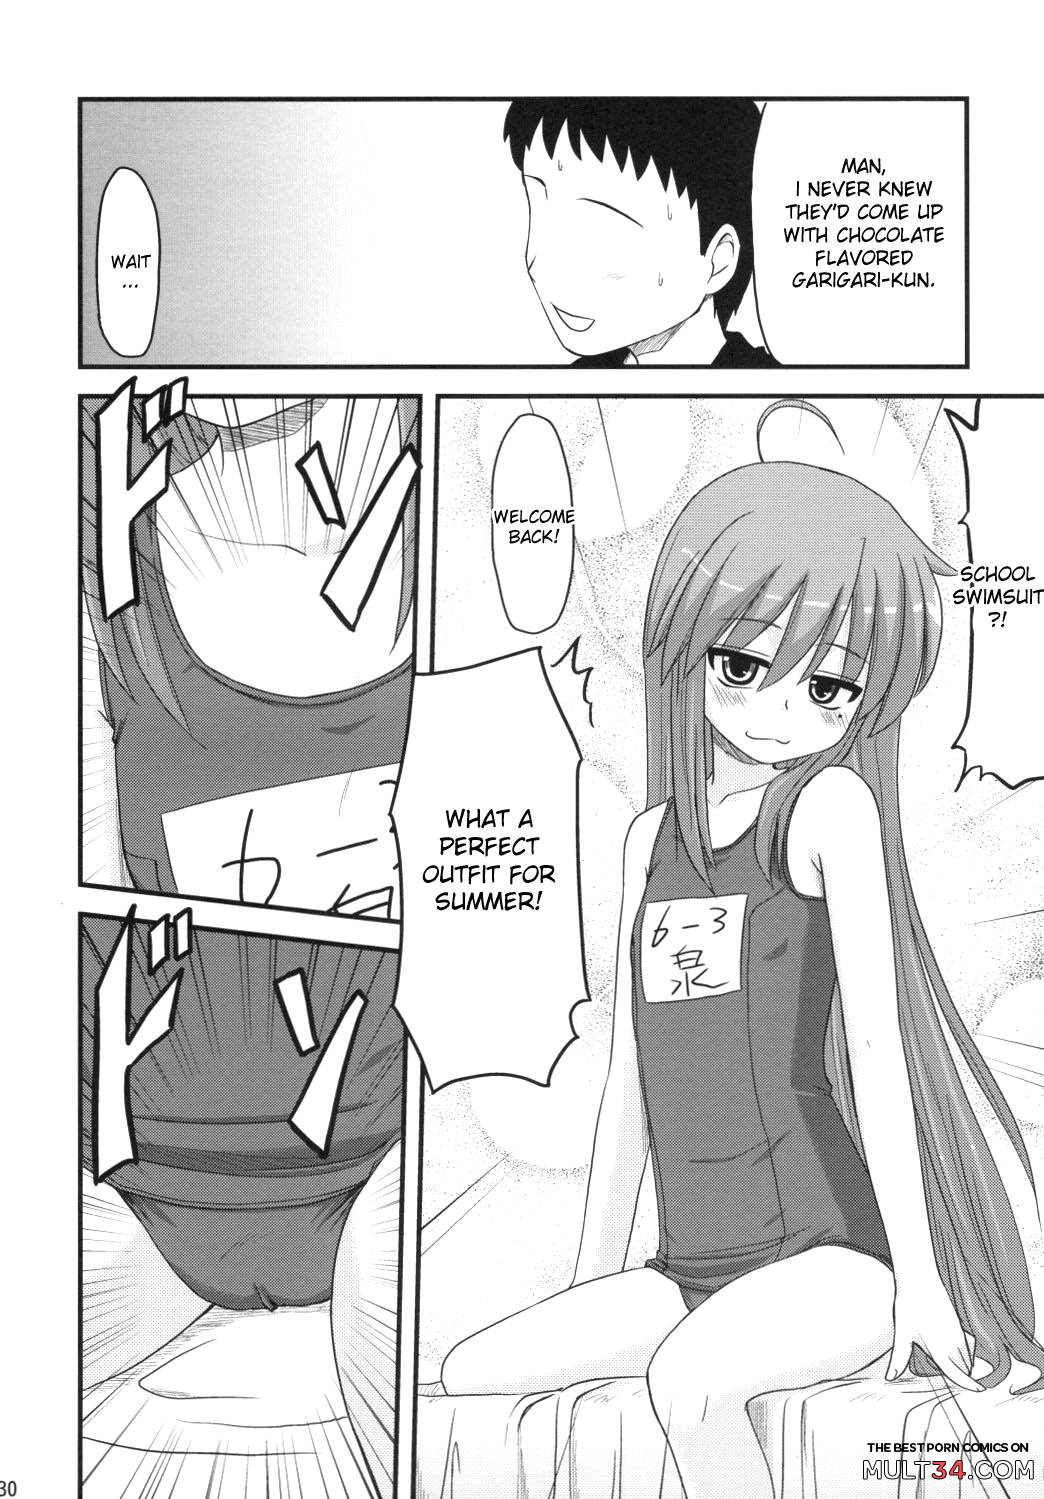 Konata and Oh-zu 4 people each and every one + 1 page 26